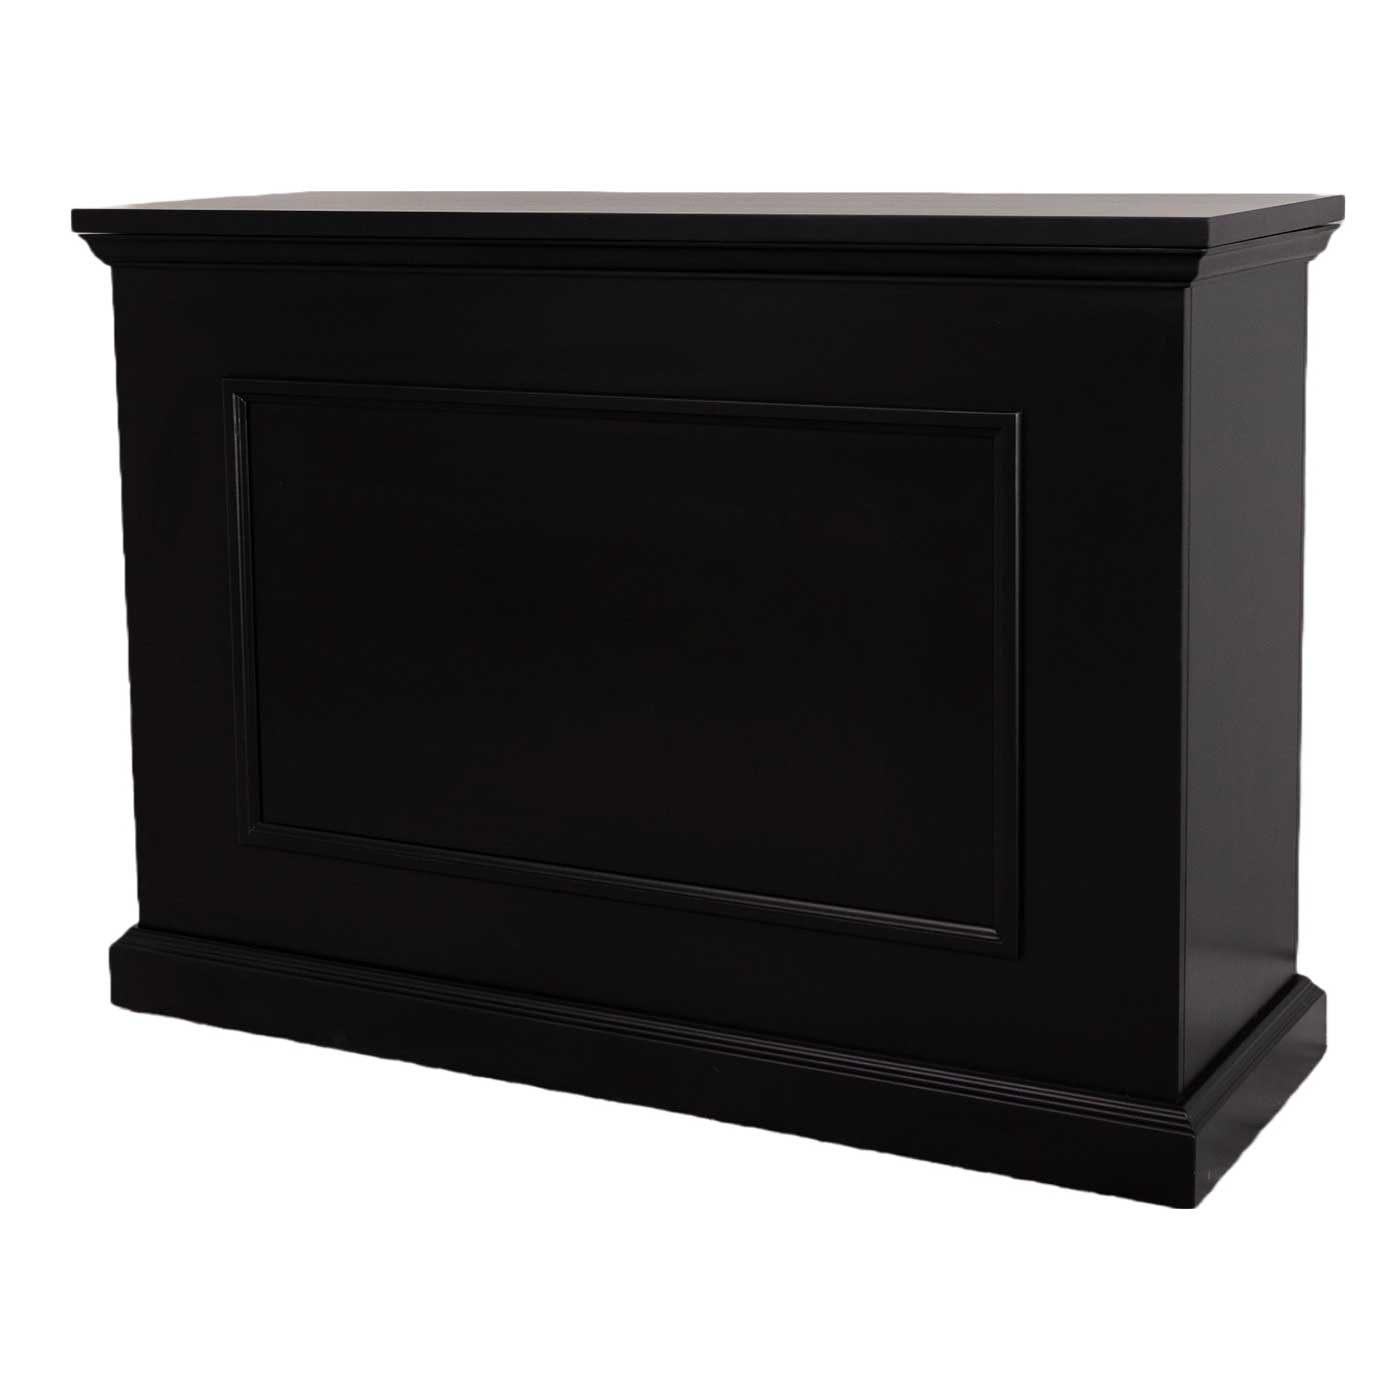 Touchstone Elevate 72011 TV Lift Cabinet in Black wood finish pictured from an angle. 